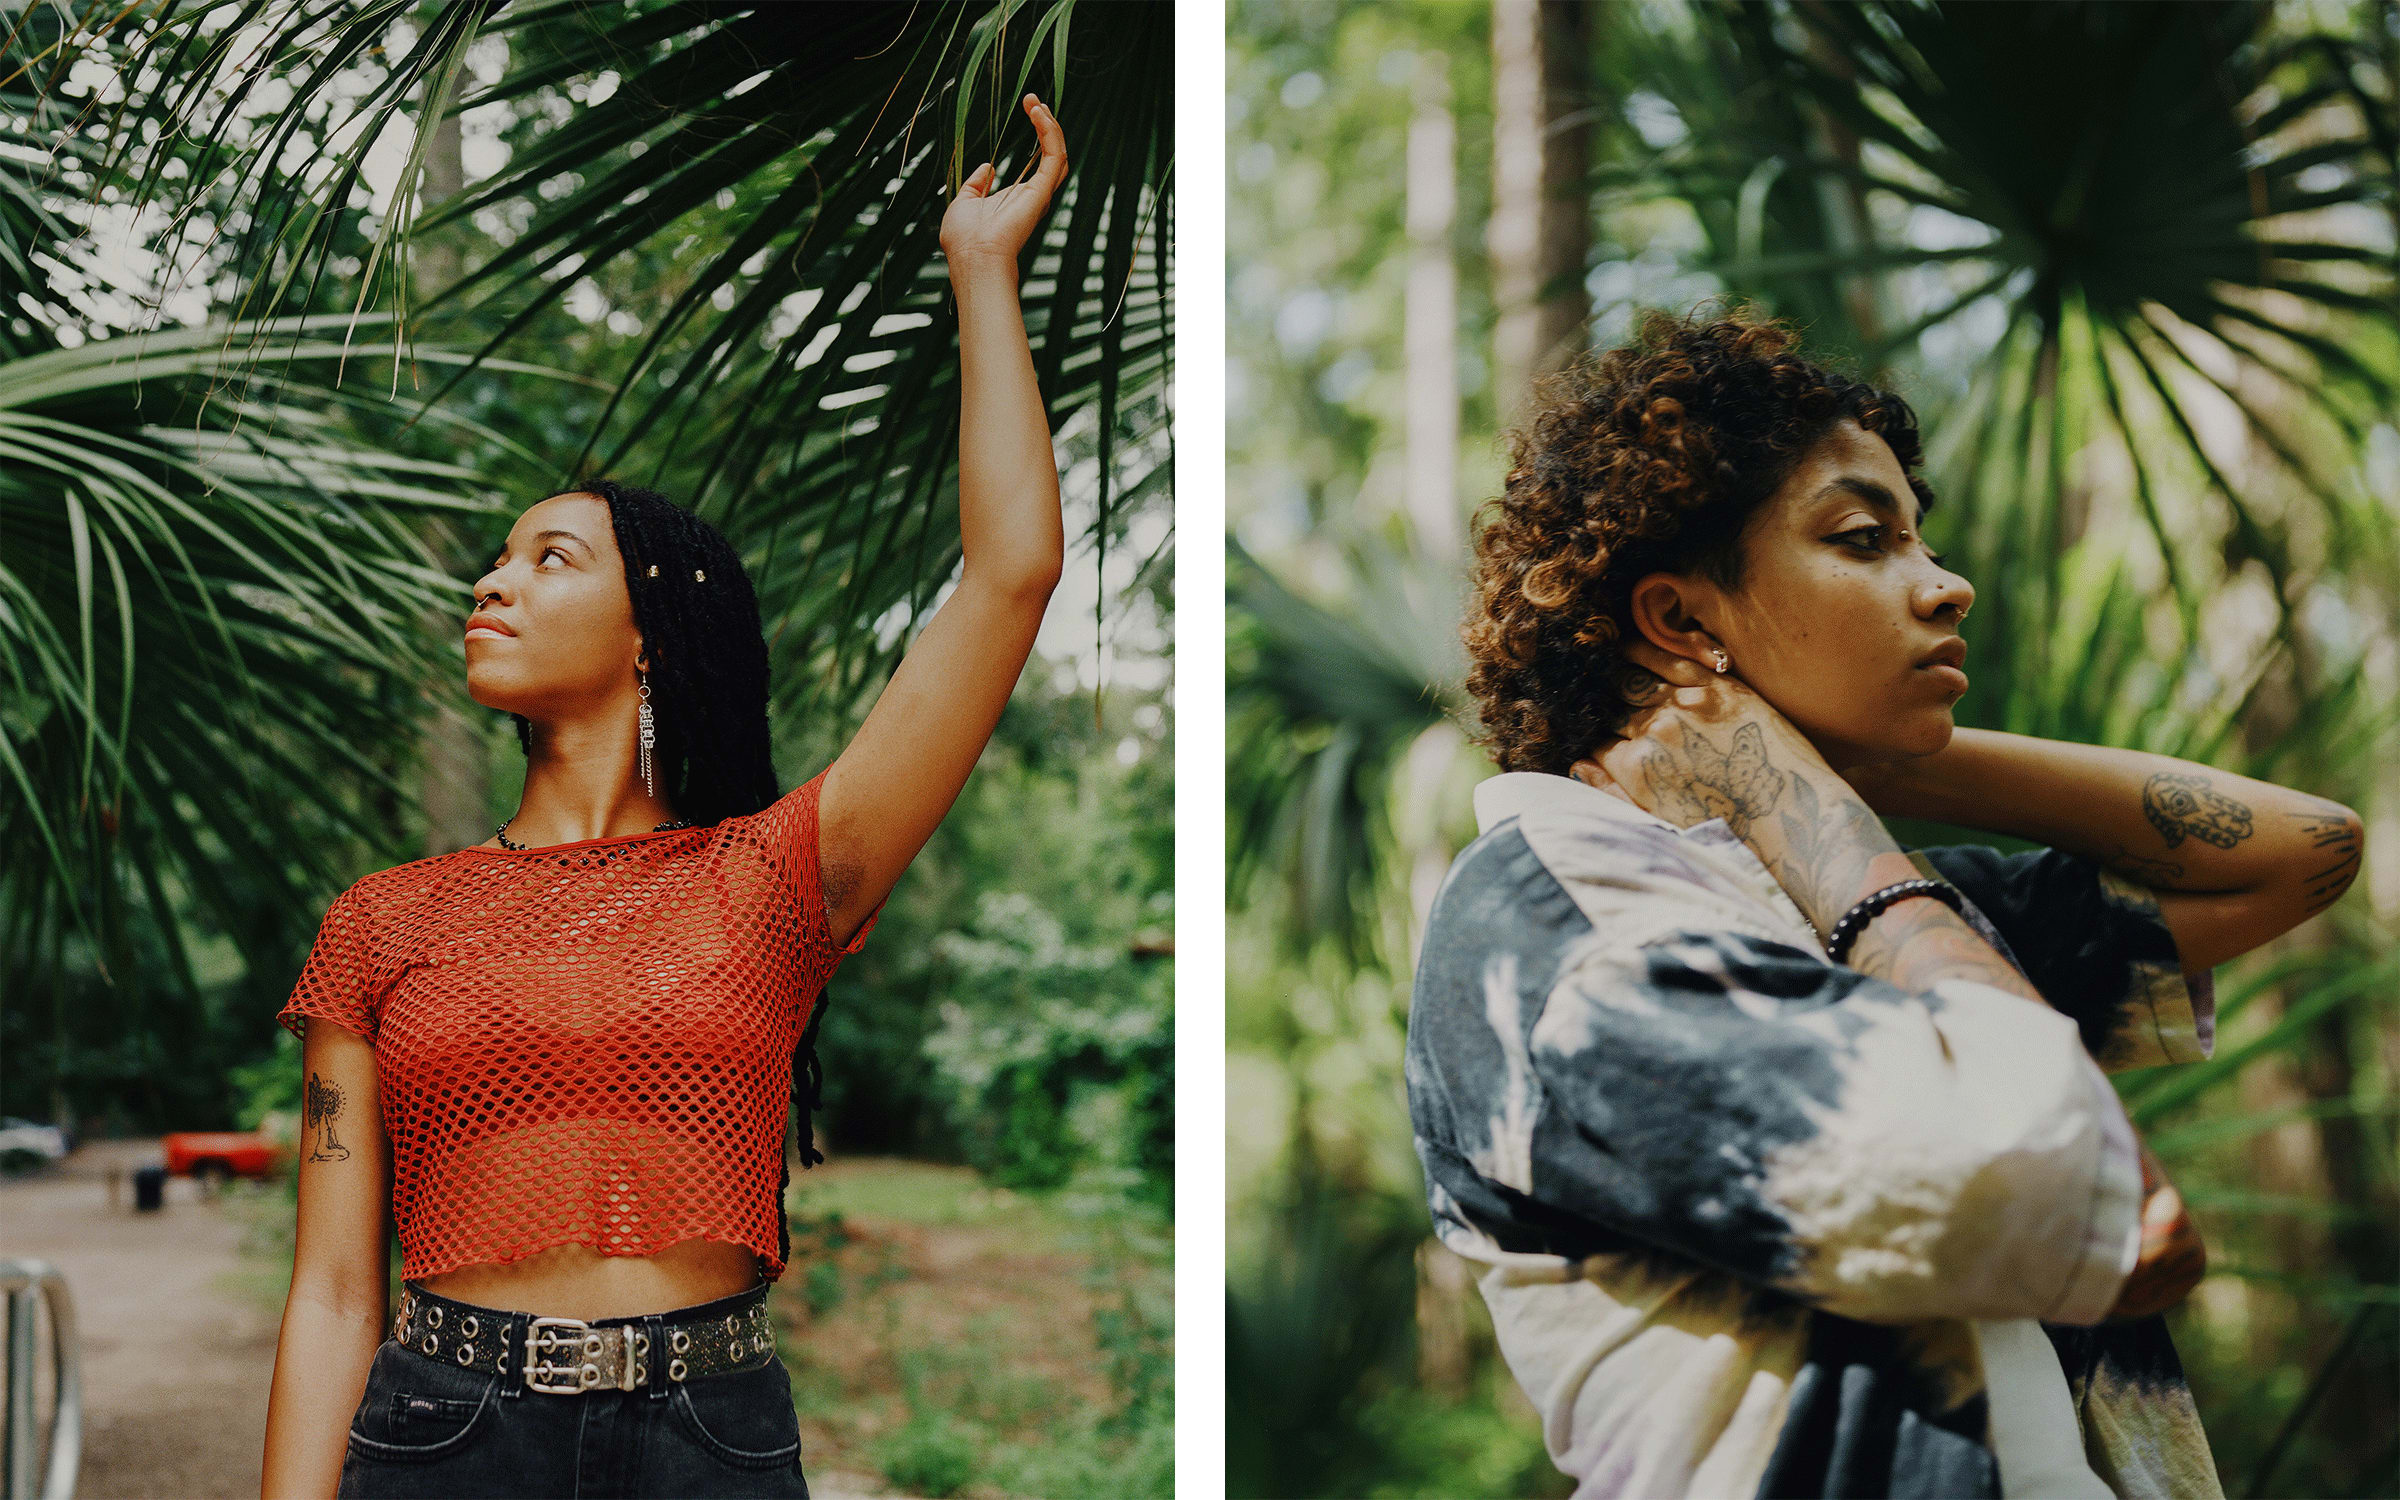 Photographs by Texas Isaiah for Atmos, 2022. Courtesy of the artist and Residency Art Gallery. Left: Autumn. Right: Lani.